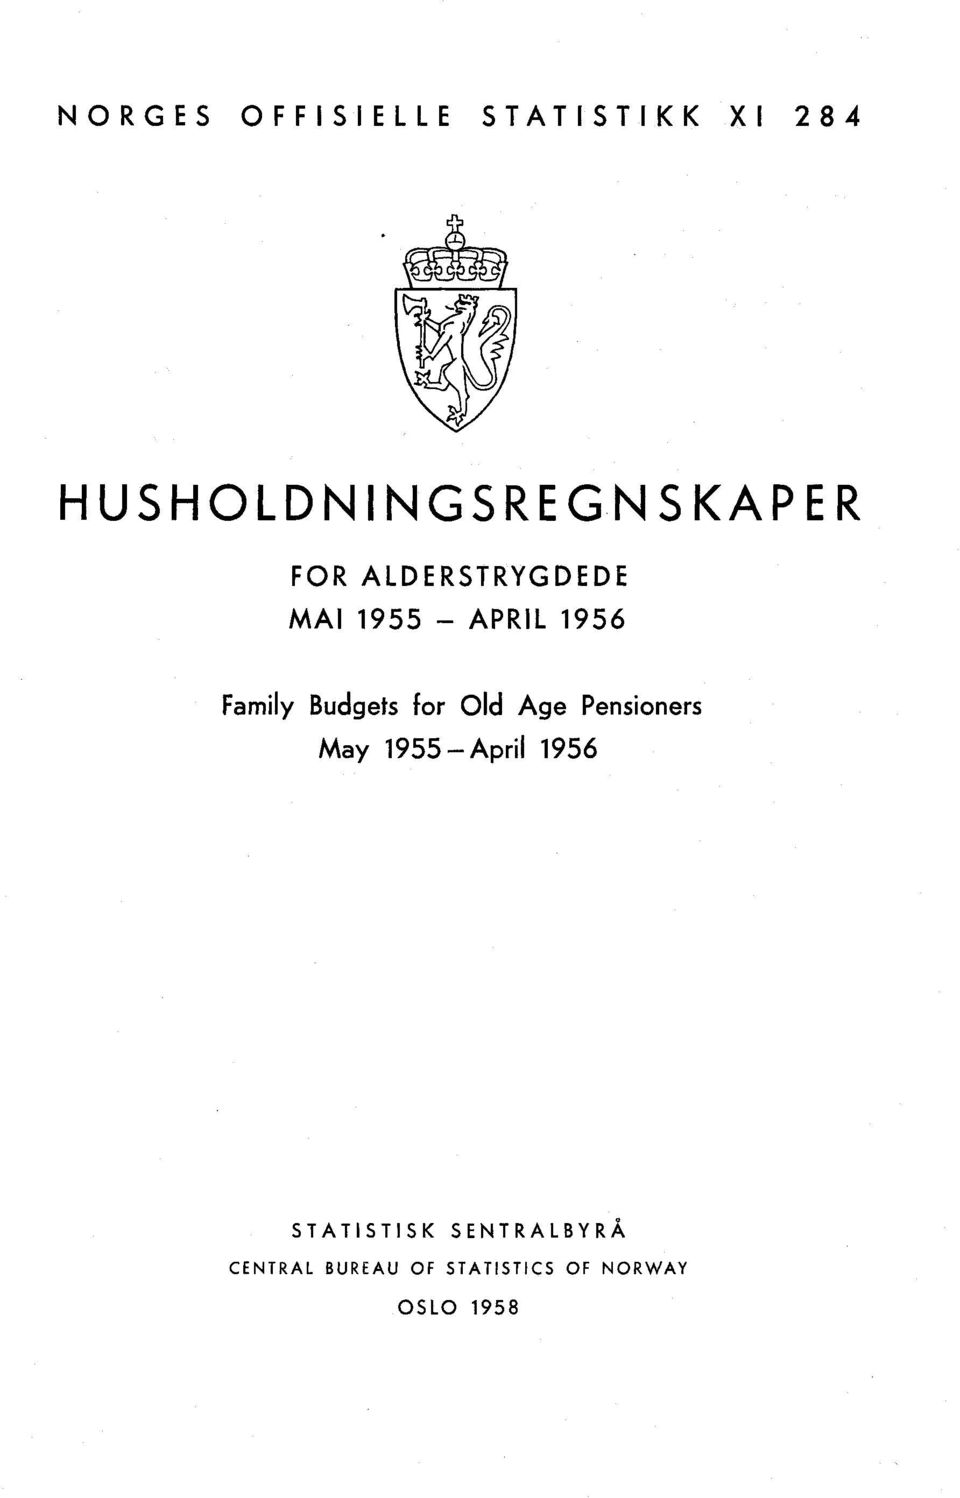 1956 Family Budgets for Old Age Pensioners May 1955